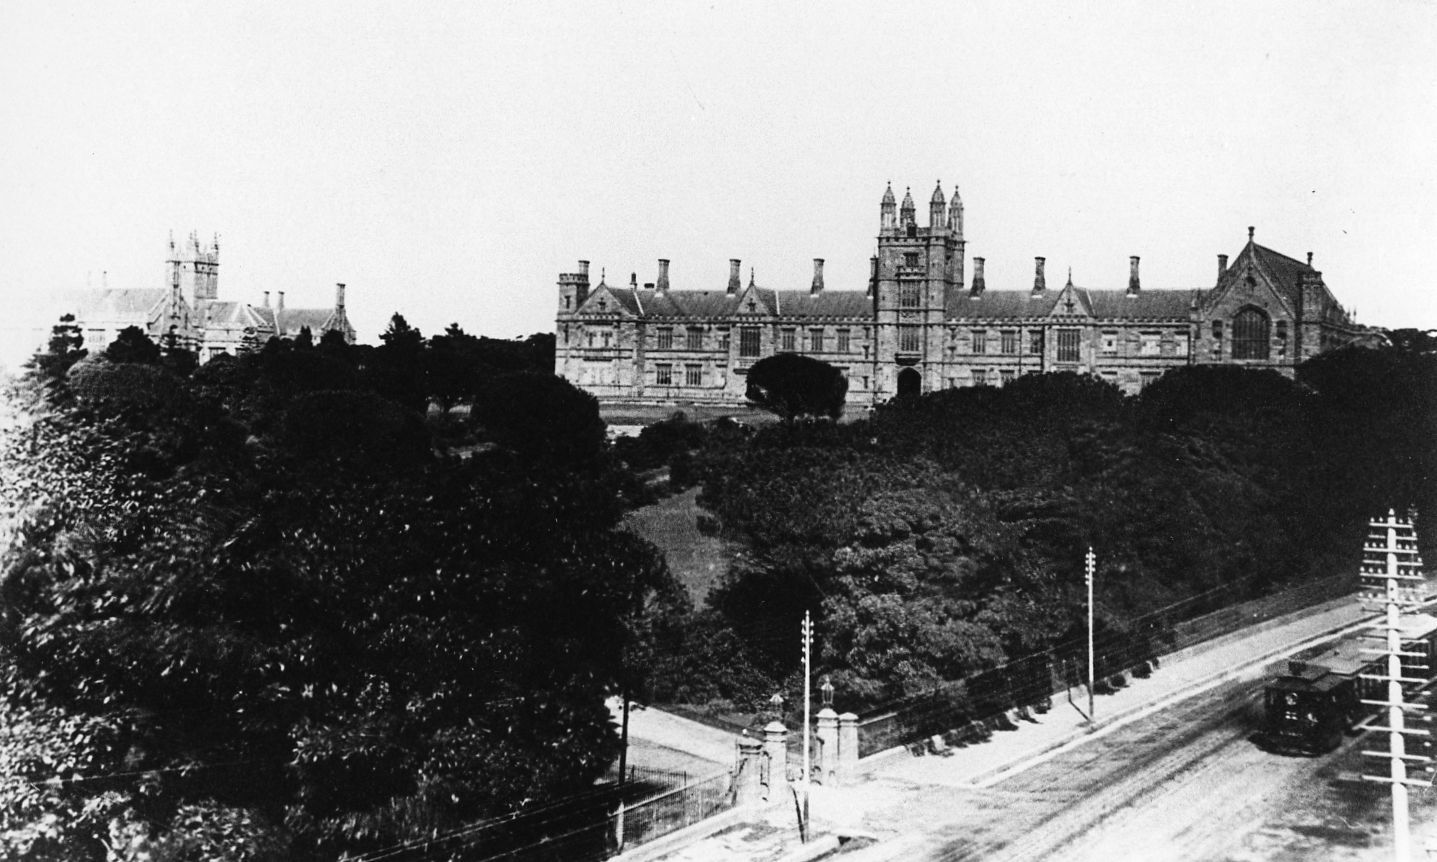 MAIN BUILDING AND GREAT HALL FROM PARRAMATTA ROAD